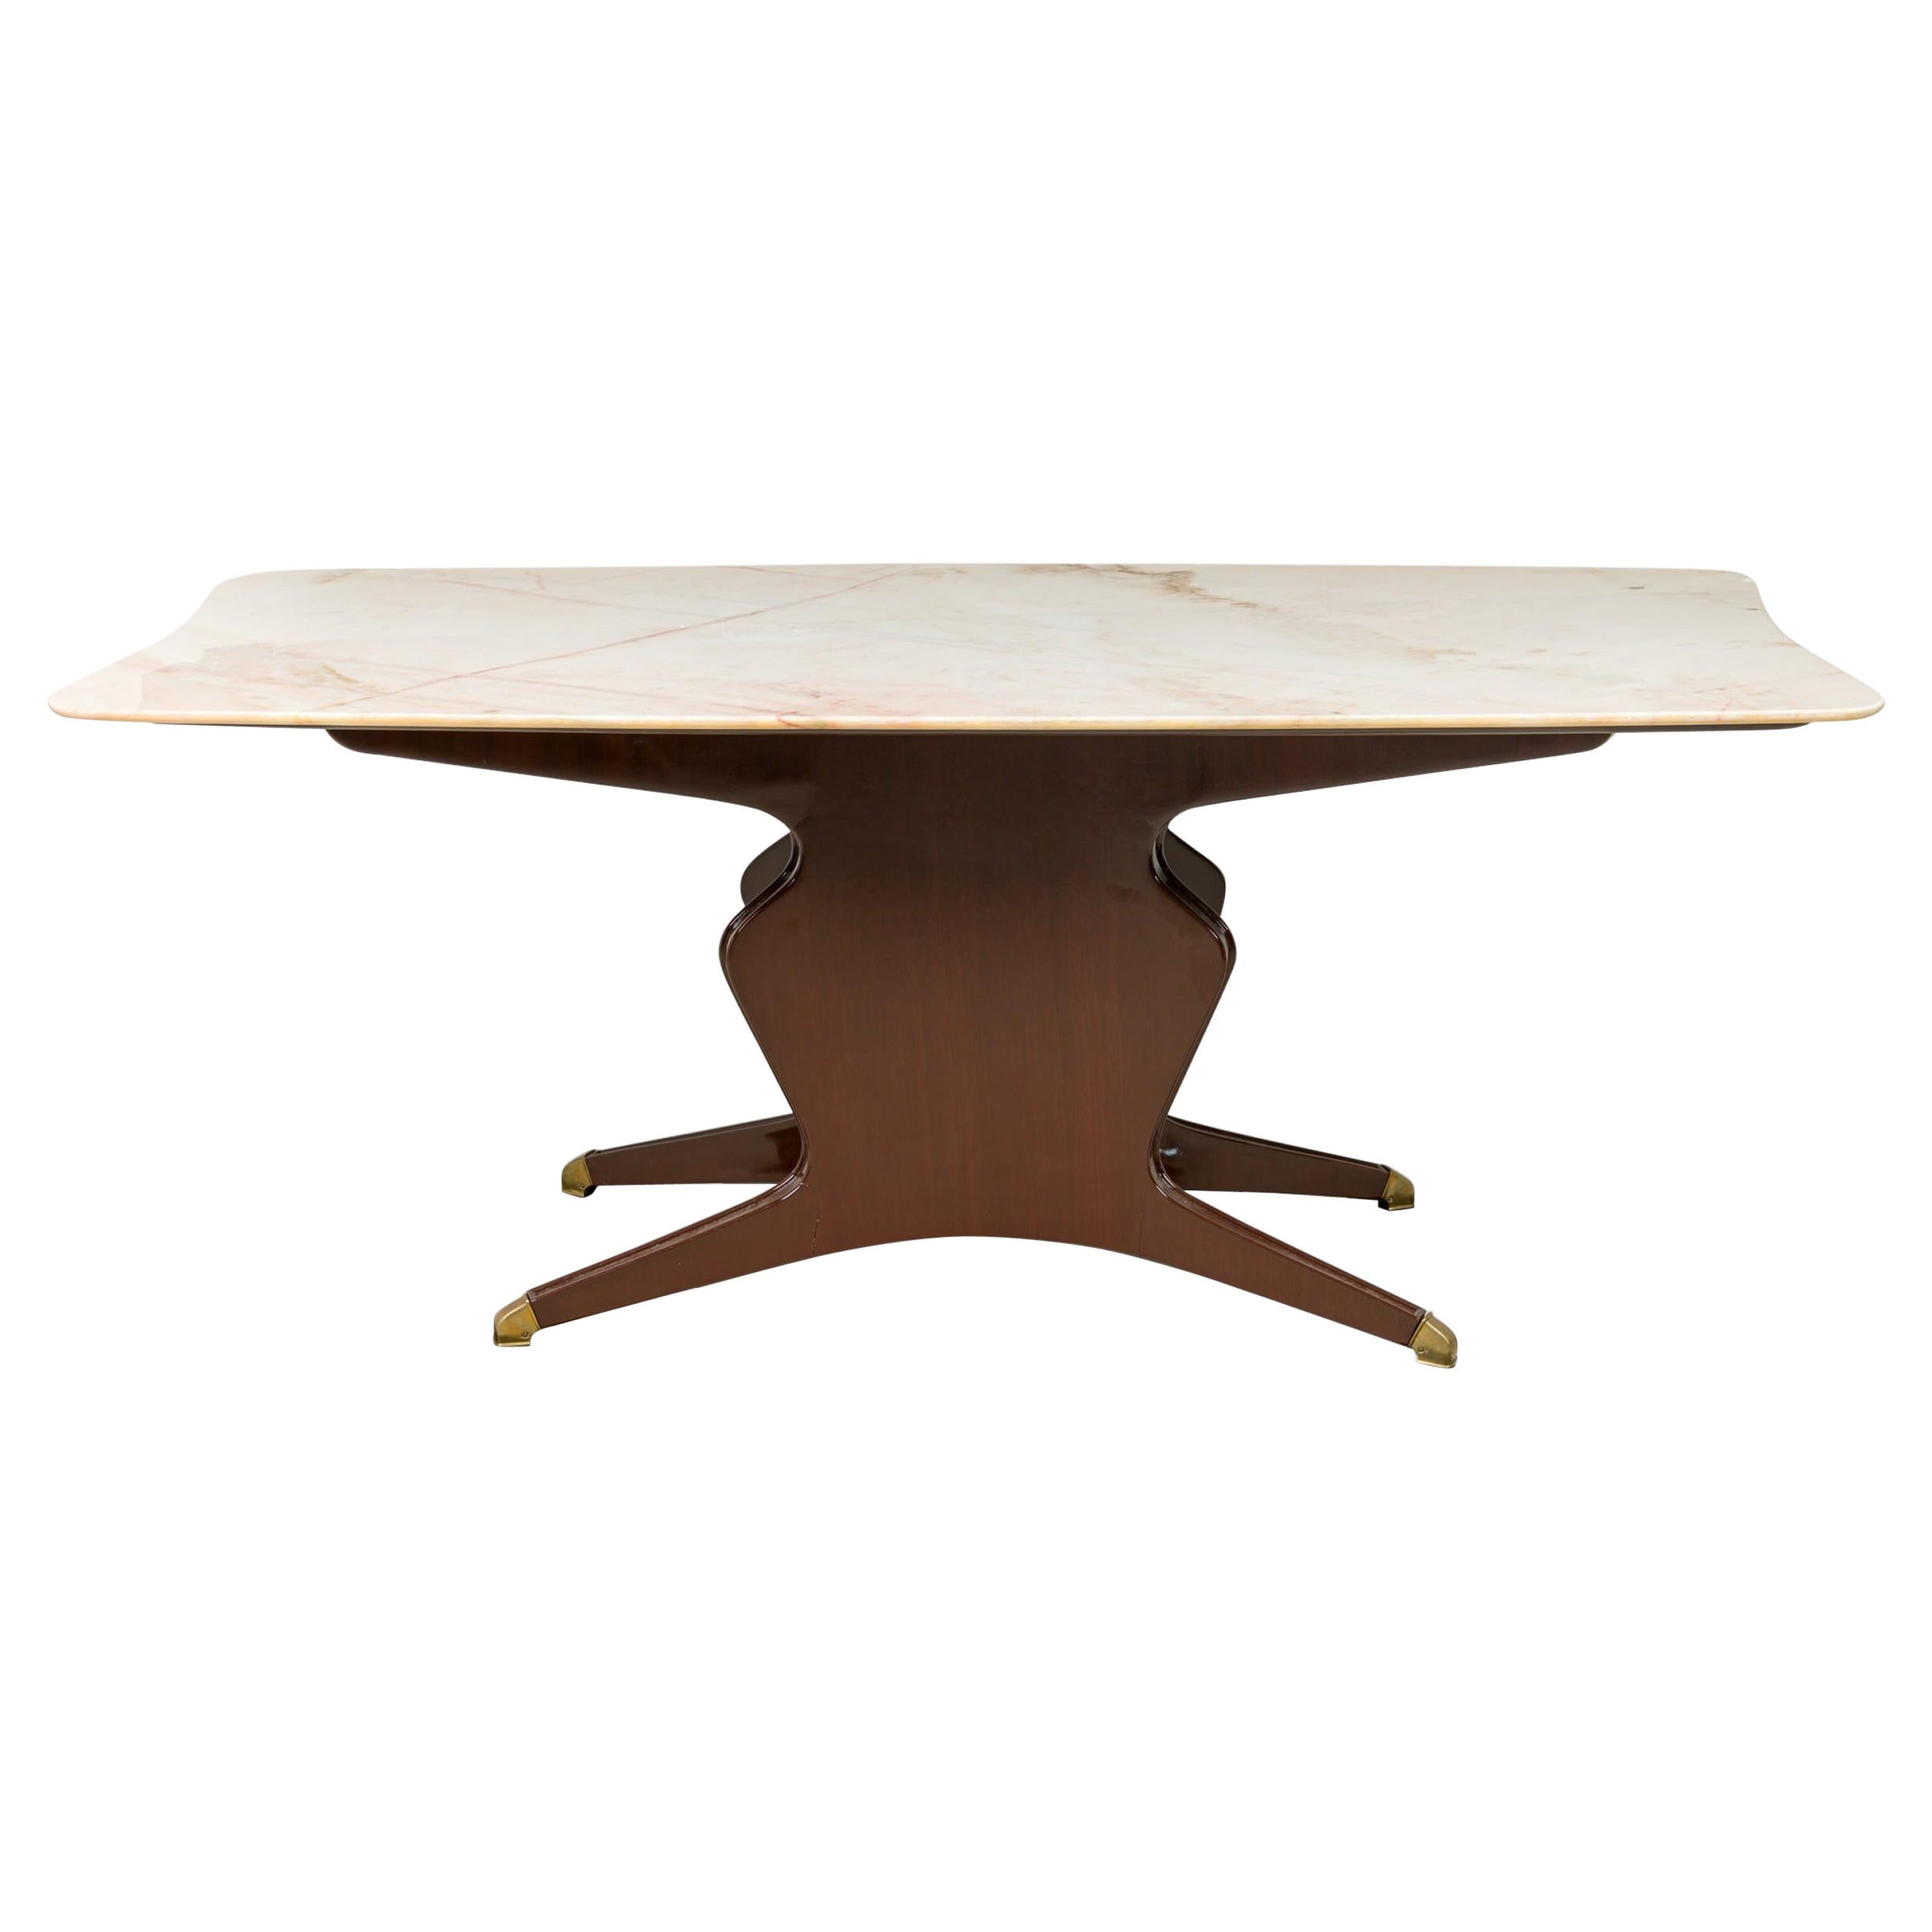 Italian Modern Mahogany, Brass, and White Onyx Dining / Conference Table